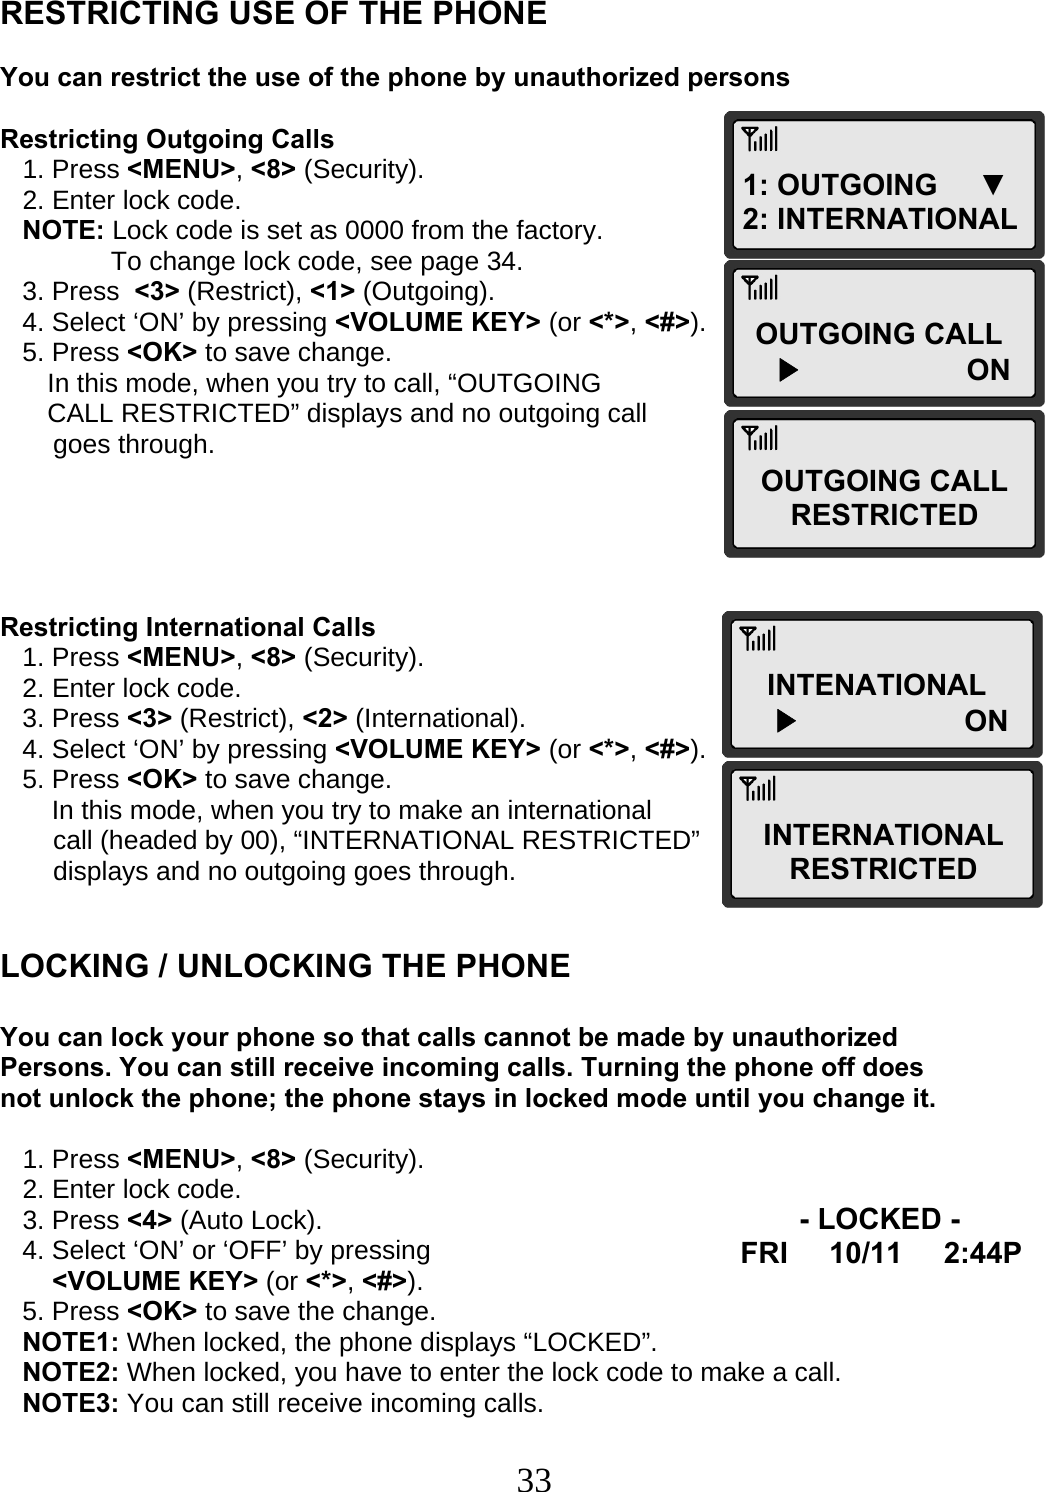  331: OUTGOING     ▼ 2: INTERNATIONAL OUTGOING CALL ▶                ONOUTGOING CALL RESTRICTED INTENATIONAL ▶                ONINTERNATIONAL RESTRICTED- LOCKED - FRI     10/11     2:44P   RESTRICTING USE OF THE PHONE  You can restrict the use of the phone by unauthorized persons  Restricting Outgoing Calls    1. Press &lt;MENU&gt;, &lt;8&gt; (Security).    2. Enter lock code.    NOTE: Lock code is set as 0000 from the factory.                To change lock code, see page 34.    3. Press  &lt;3&gt; (Restrict), &lt;1&gt; (Outgoing).    4. Select ‘ON’ by pressing &lt;VOLUME KEY&gt; (or &lt;*&gt;, &lt;#&gt;).    5. Press &lt;OK&gt; to save change.  In this mode, when you try to call, “OUTGOING  CALL RESTRICTED” displays and no outgoing call  goes through.      Restricting International Calls    1. Press &lt;MENU&gt;, &lt;8&gt; (Security).    2. Enter lock code.    3. Press &lt;3&gt; (Restrict), &lt;2&gt; (International).    4. Select ‘ON’ by pressing &lt;VOLUME KEY&gt; (or &lt;*&gt;, &lt;#&gt;).    5. Press &lt;OK&gt; to save change.        In this mode, when you try to make an international  call (headed by 00), “INTERNATIONAL RESTRICTED”  displays and no outgoing goes through.   LOCKING / UNLOCKING THE PHONE  You can lock your phone so that calls cannot be made by unauthorized Persons. You can still receive incoming calls. Turning the phone off does not unlock the phone; the phone stays in locked mode until you change it.     1. Press &lt;MENU&gt;, &lt;8&gt; (Security).    2. Enter lock code.    3. Press &lt;4&gt; (Auto Lock).    4. Select ‘ON’ or ‘OFF’ by pressing   &lt;VOLUME KEY&gt; (or &lt;*&gt;, &lt;#&gt;).    5. Press &lt;OK&gt; to save the change.    NOTE1: When locked, the phone displays “LOCKED”.    NOTE2: When locked, you have to enter the lock code to make a call.    NOTE3: You can still receive incoming calls.  